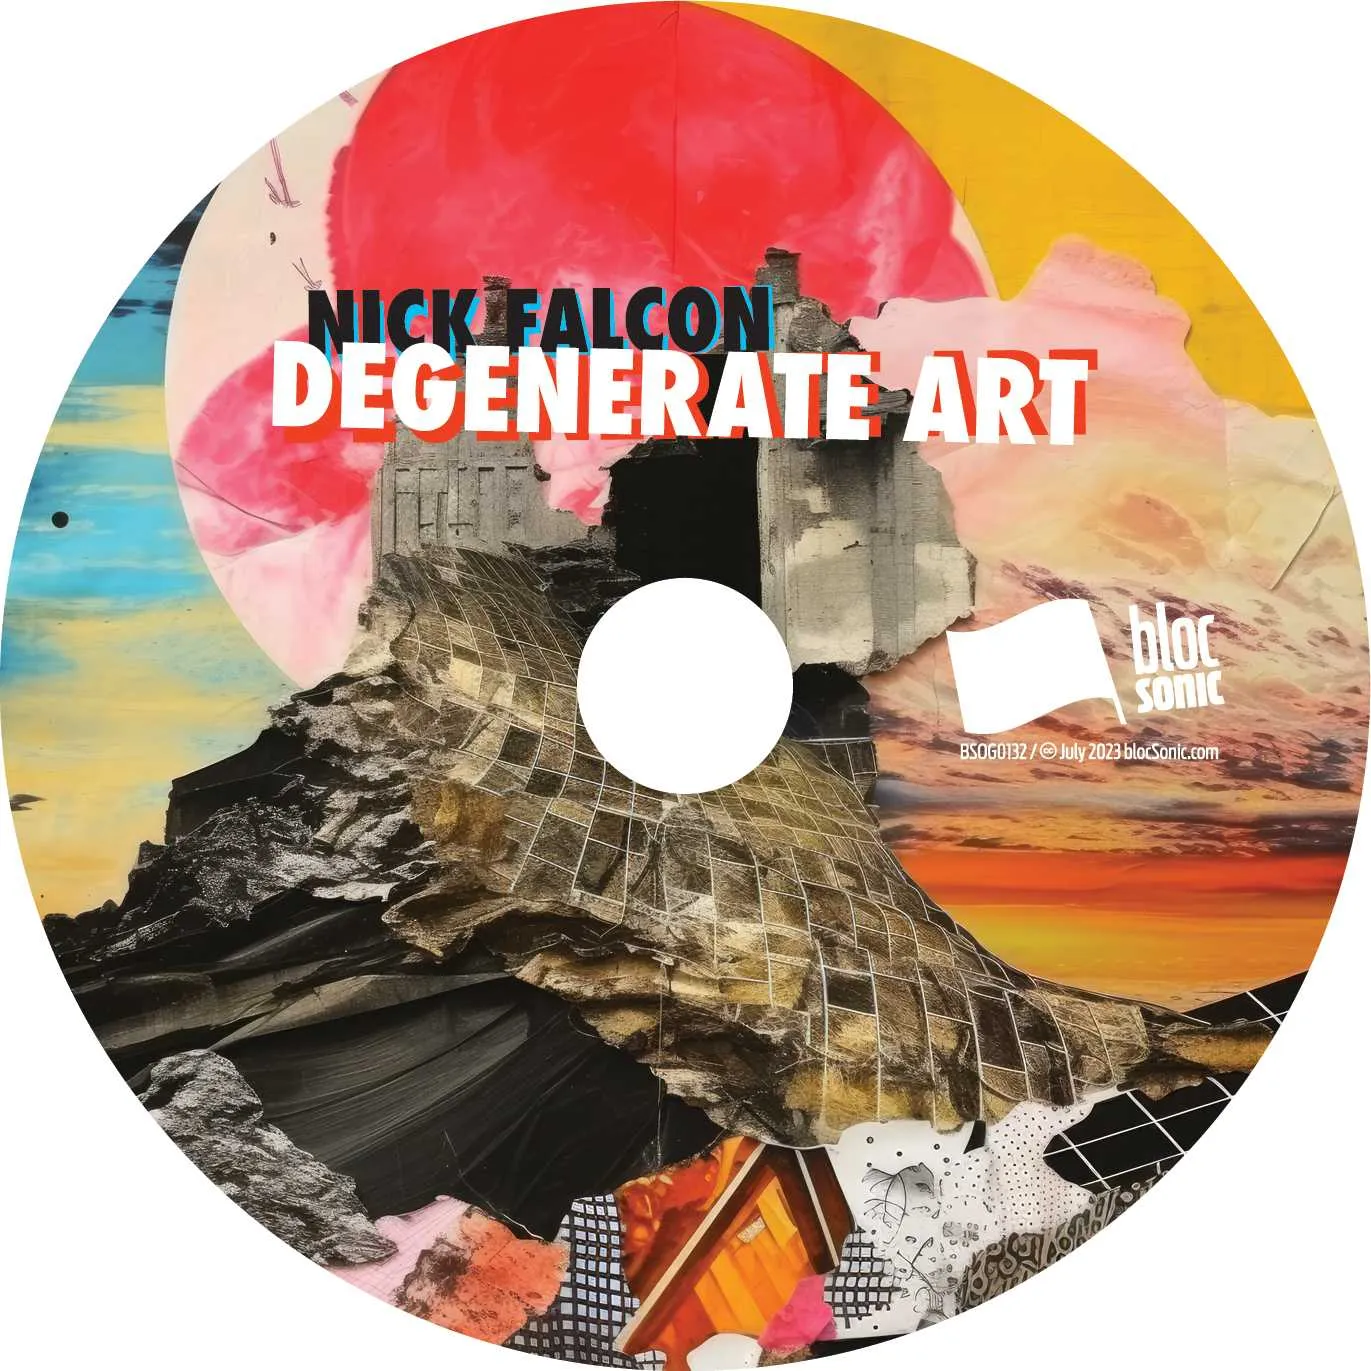 Album disc for “Degenerate Art” by Nick Falcon